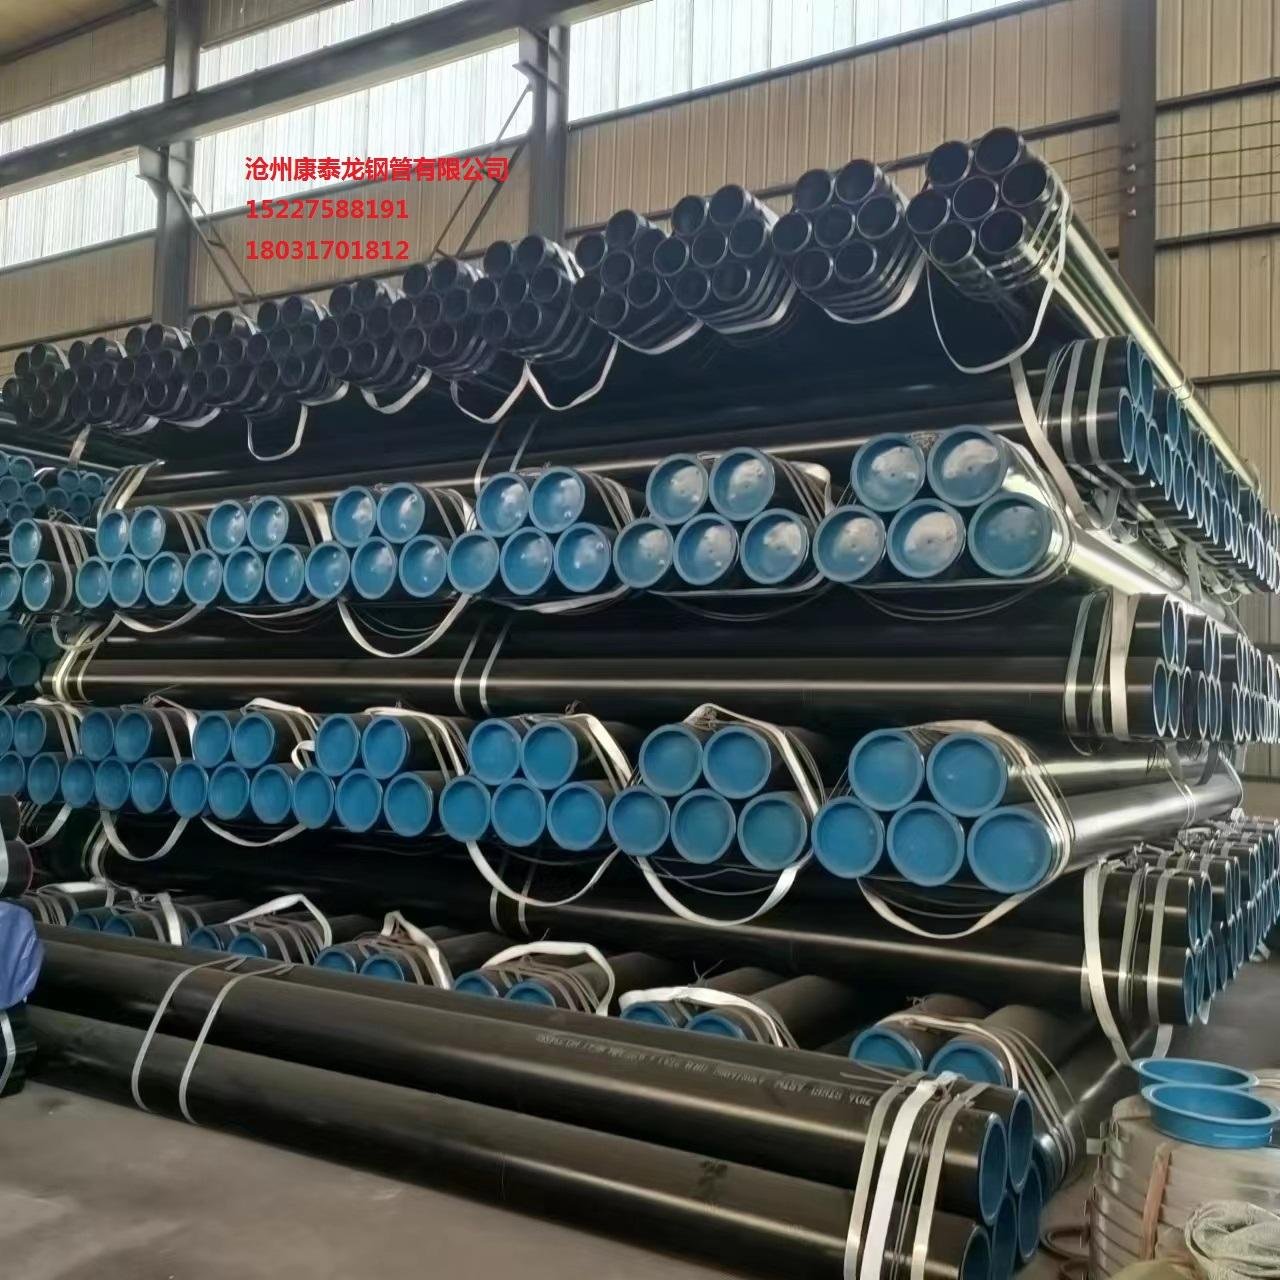 Foreign trade 355.6*11.13 US standard seamless pipe 3